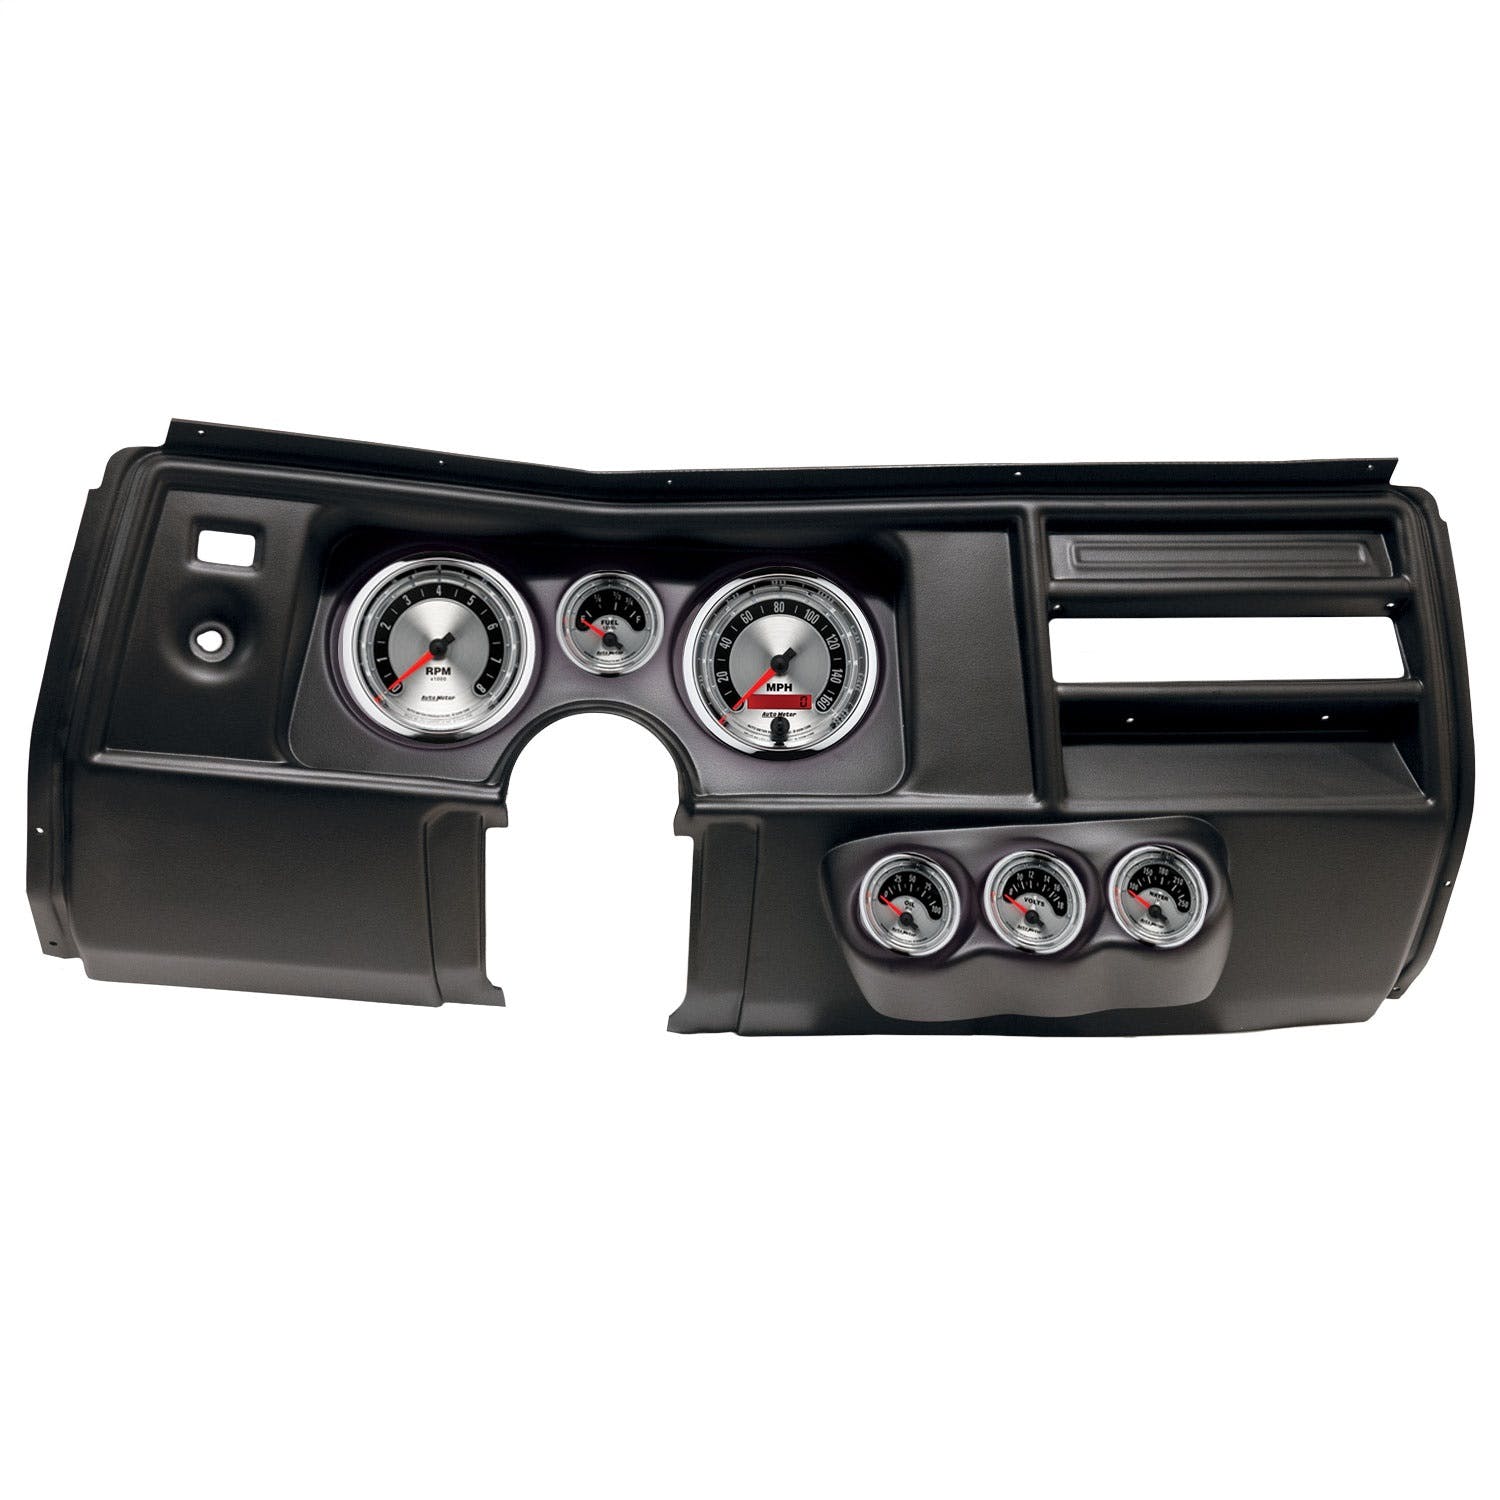 AutoMeter Products 2910-01 6 Gauge Direct-Fit Dash Kit, Chevy Chevelle No Vent 69, American Muscle